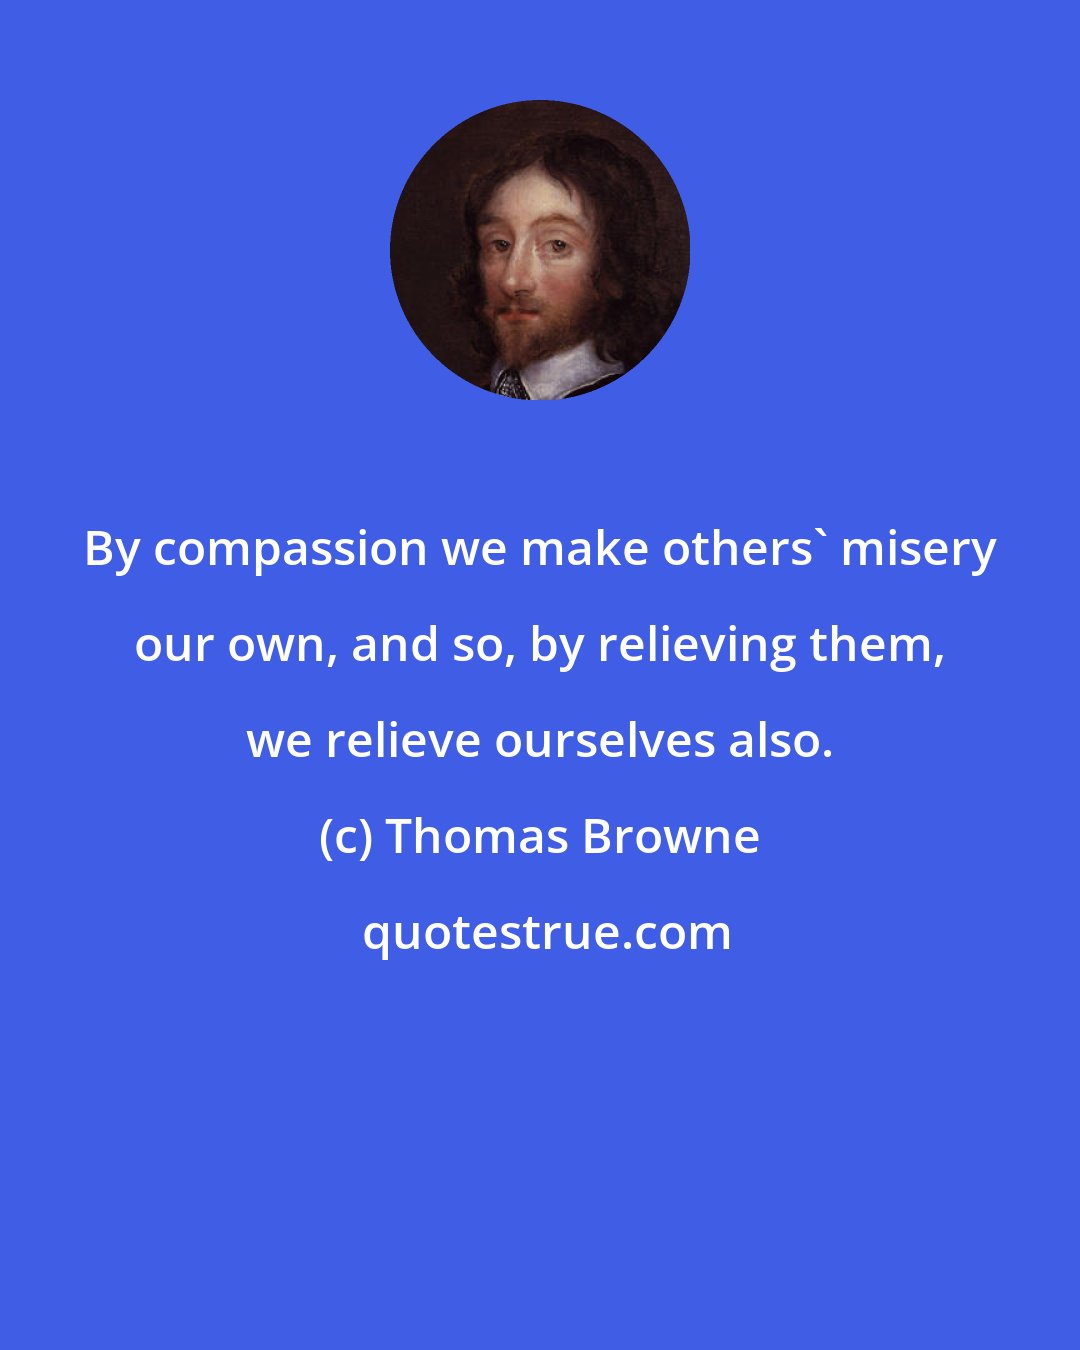 Thomas Browne: By compassion we make others' misery our own, and so, by relieving them, we relieve ourselves also.